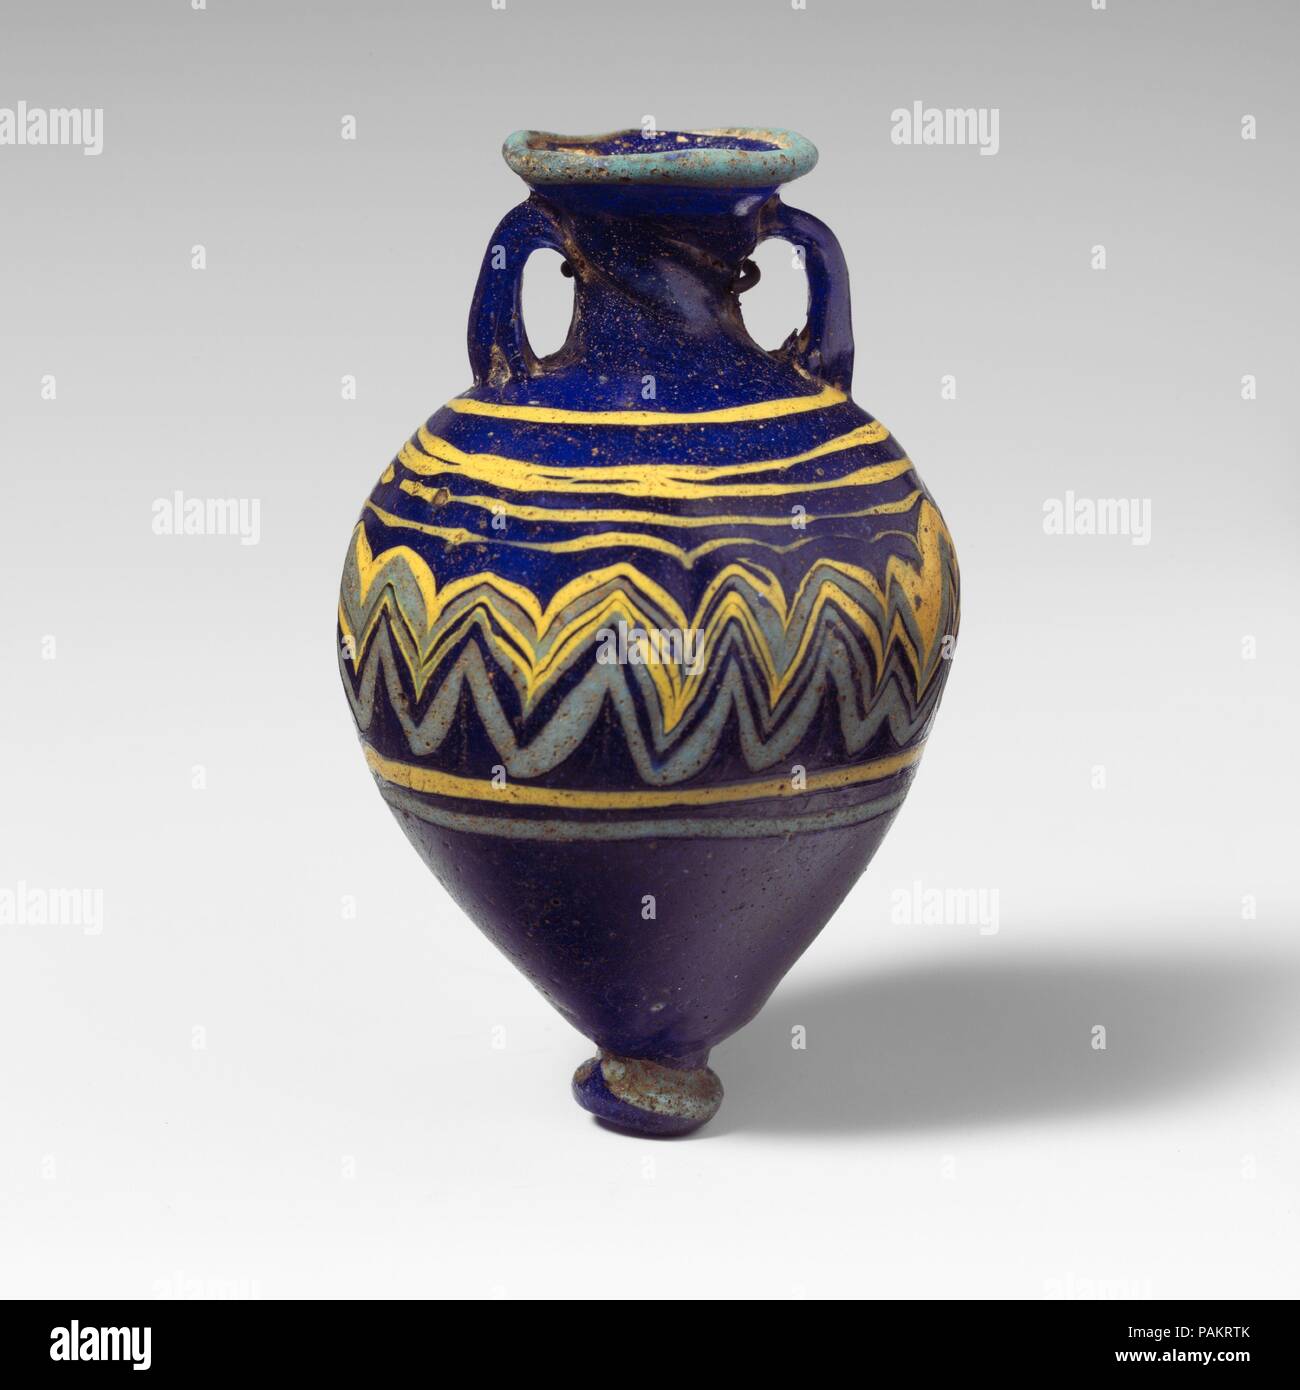 Glass amphoriskos (perfume bottle). Culture: Greek, Eastern Mediterranean. Dimensions: H.: 3 1/2 in. (8.9 cm). Date: late 6th-5th century B.C..  Translucent cobalt blue, with handles in same color; trails in opaque yellow and opaque turquoise blue.  Uneven inward-sloping rim-disk; cylindrical neck with spiral tooling marks, tapering downwards; broad sloping shoulder; top-shaped body; circular base-knob with indent on uneven bottom; two strap handles applied to top of shoulder, drawn up, and pressed onto neck.  Turquoise blue trail attached at edge of rim-disk; a yellow trail applied in an  irr Stock Photo